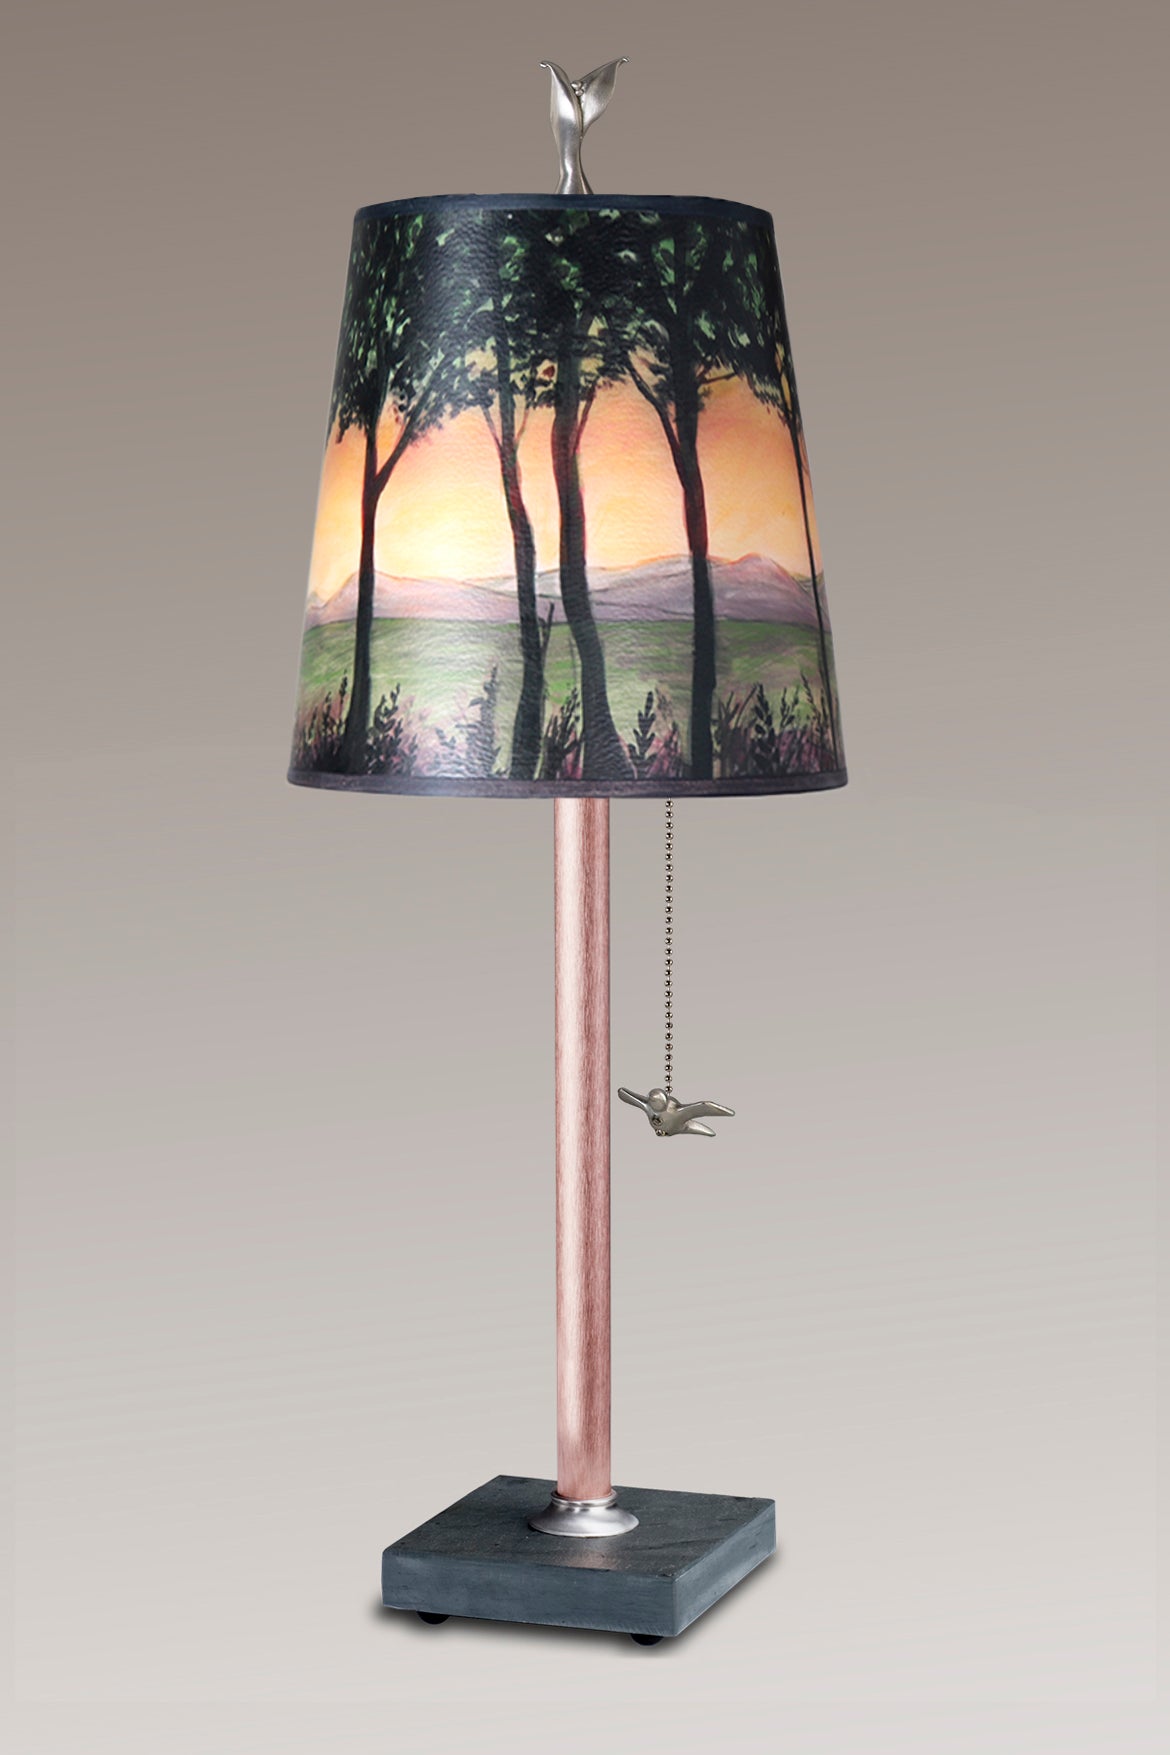 Copper Table Lamp with Small Drum Shade in Dawn